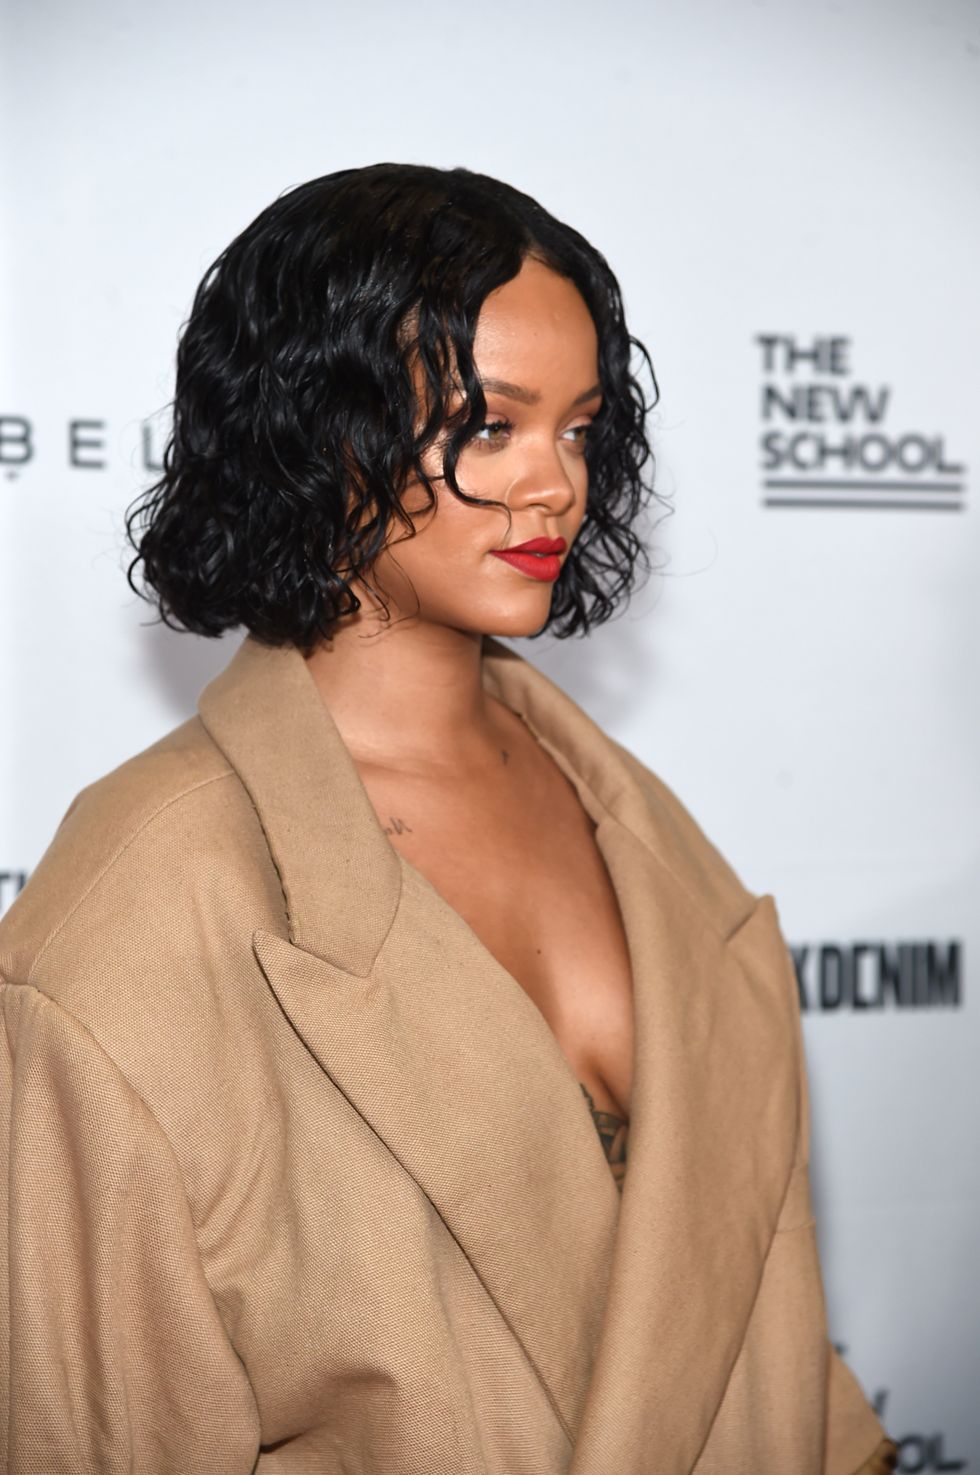 new york, ny may 22 honoree rihanna attends the 69th annual parsons benefit at pier 60 on may 22, 2017 in new york city photo by jamie mccarthygetty images for the new school